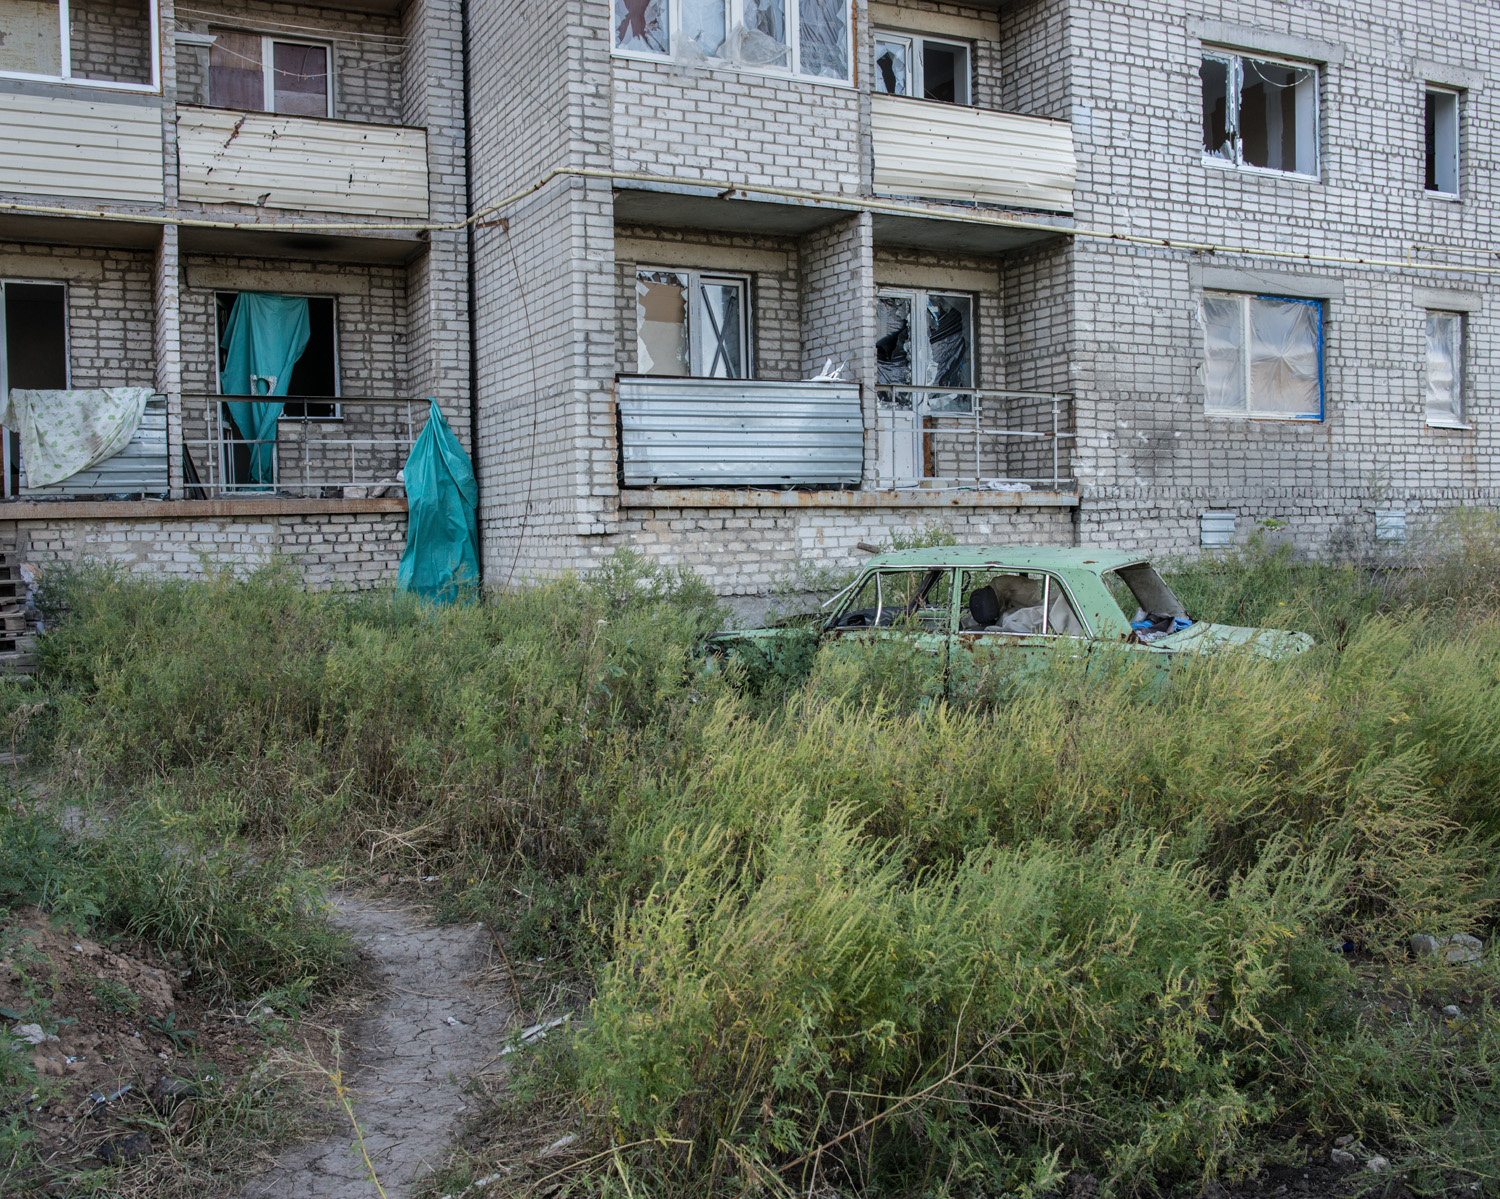  An apartment building in the town of Avdiivka. In mid-2014 Avdiivka was badly damaged when seized by separatists; it was subsequently reclaimed by Ukrainian forces. 